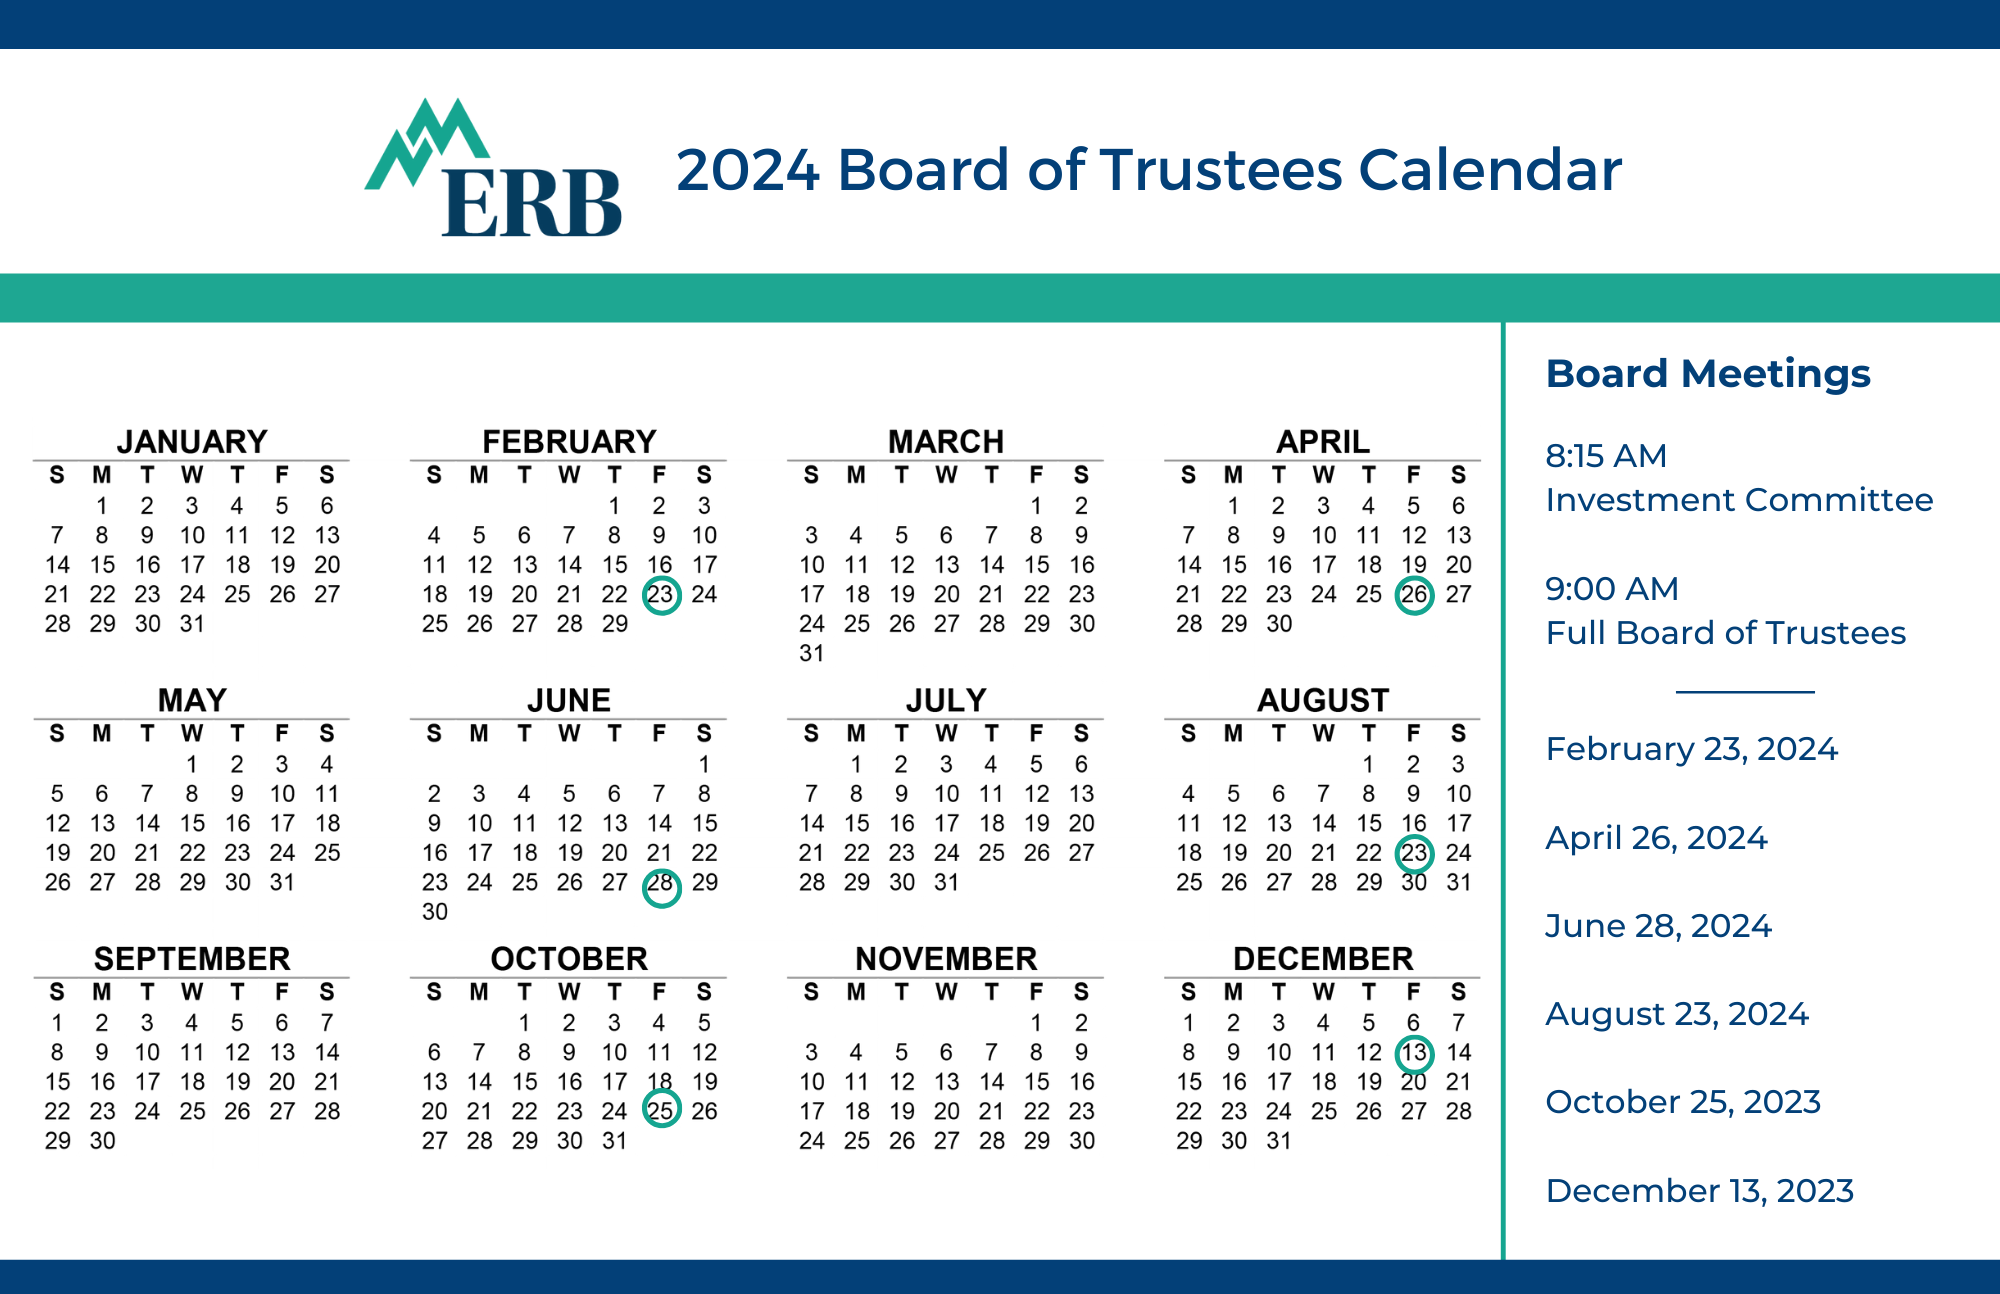 ERB BOT Board Meeting Calendar 2024 Investment Committee - 8:15am with Full Board of Trustees at 9:00 am; Meeting dates: February 23; April 26; June 28; August 23; October 25; and December 13; Location to be determined.